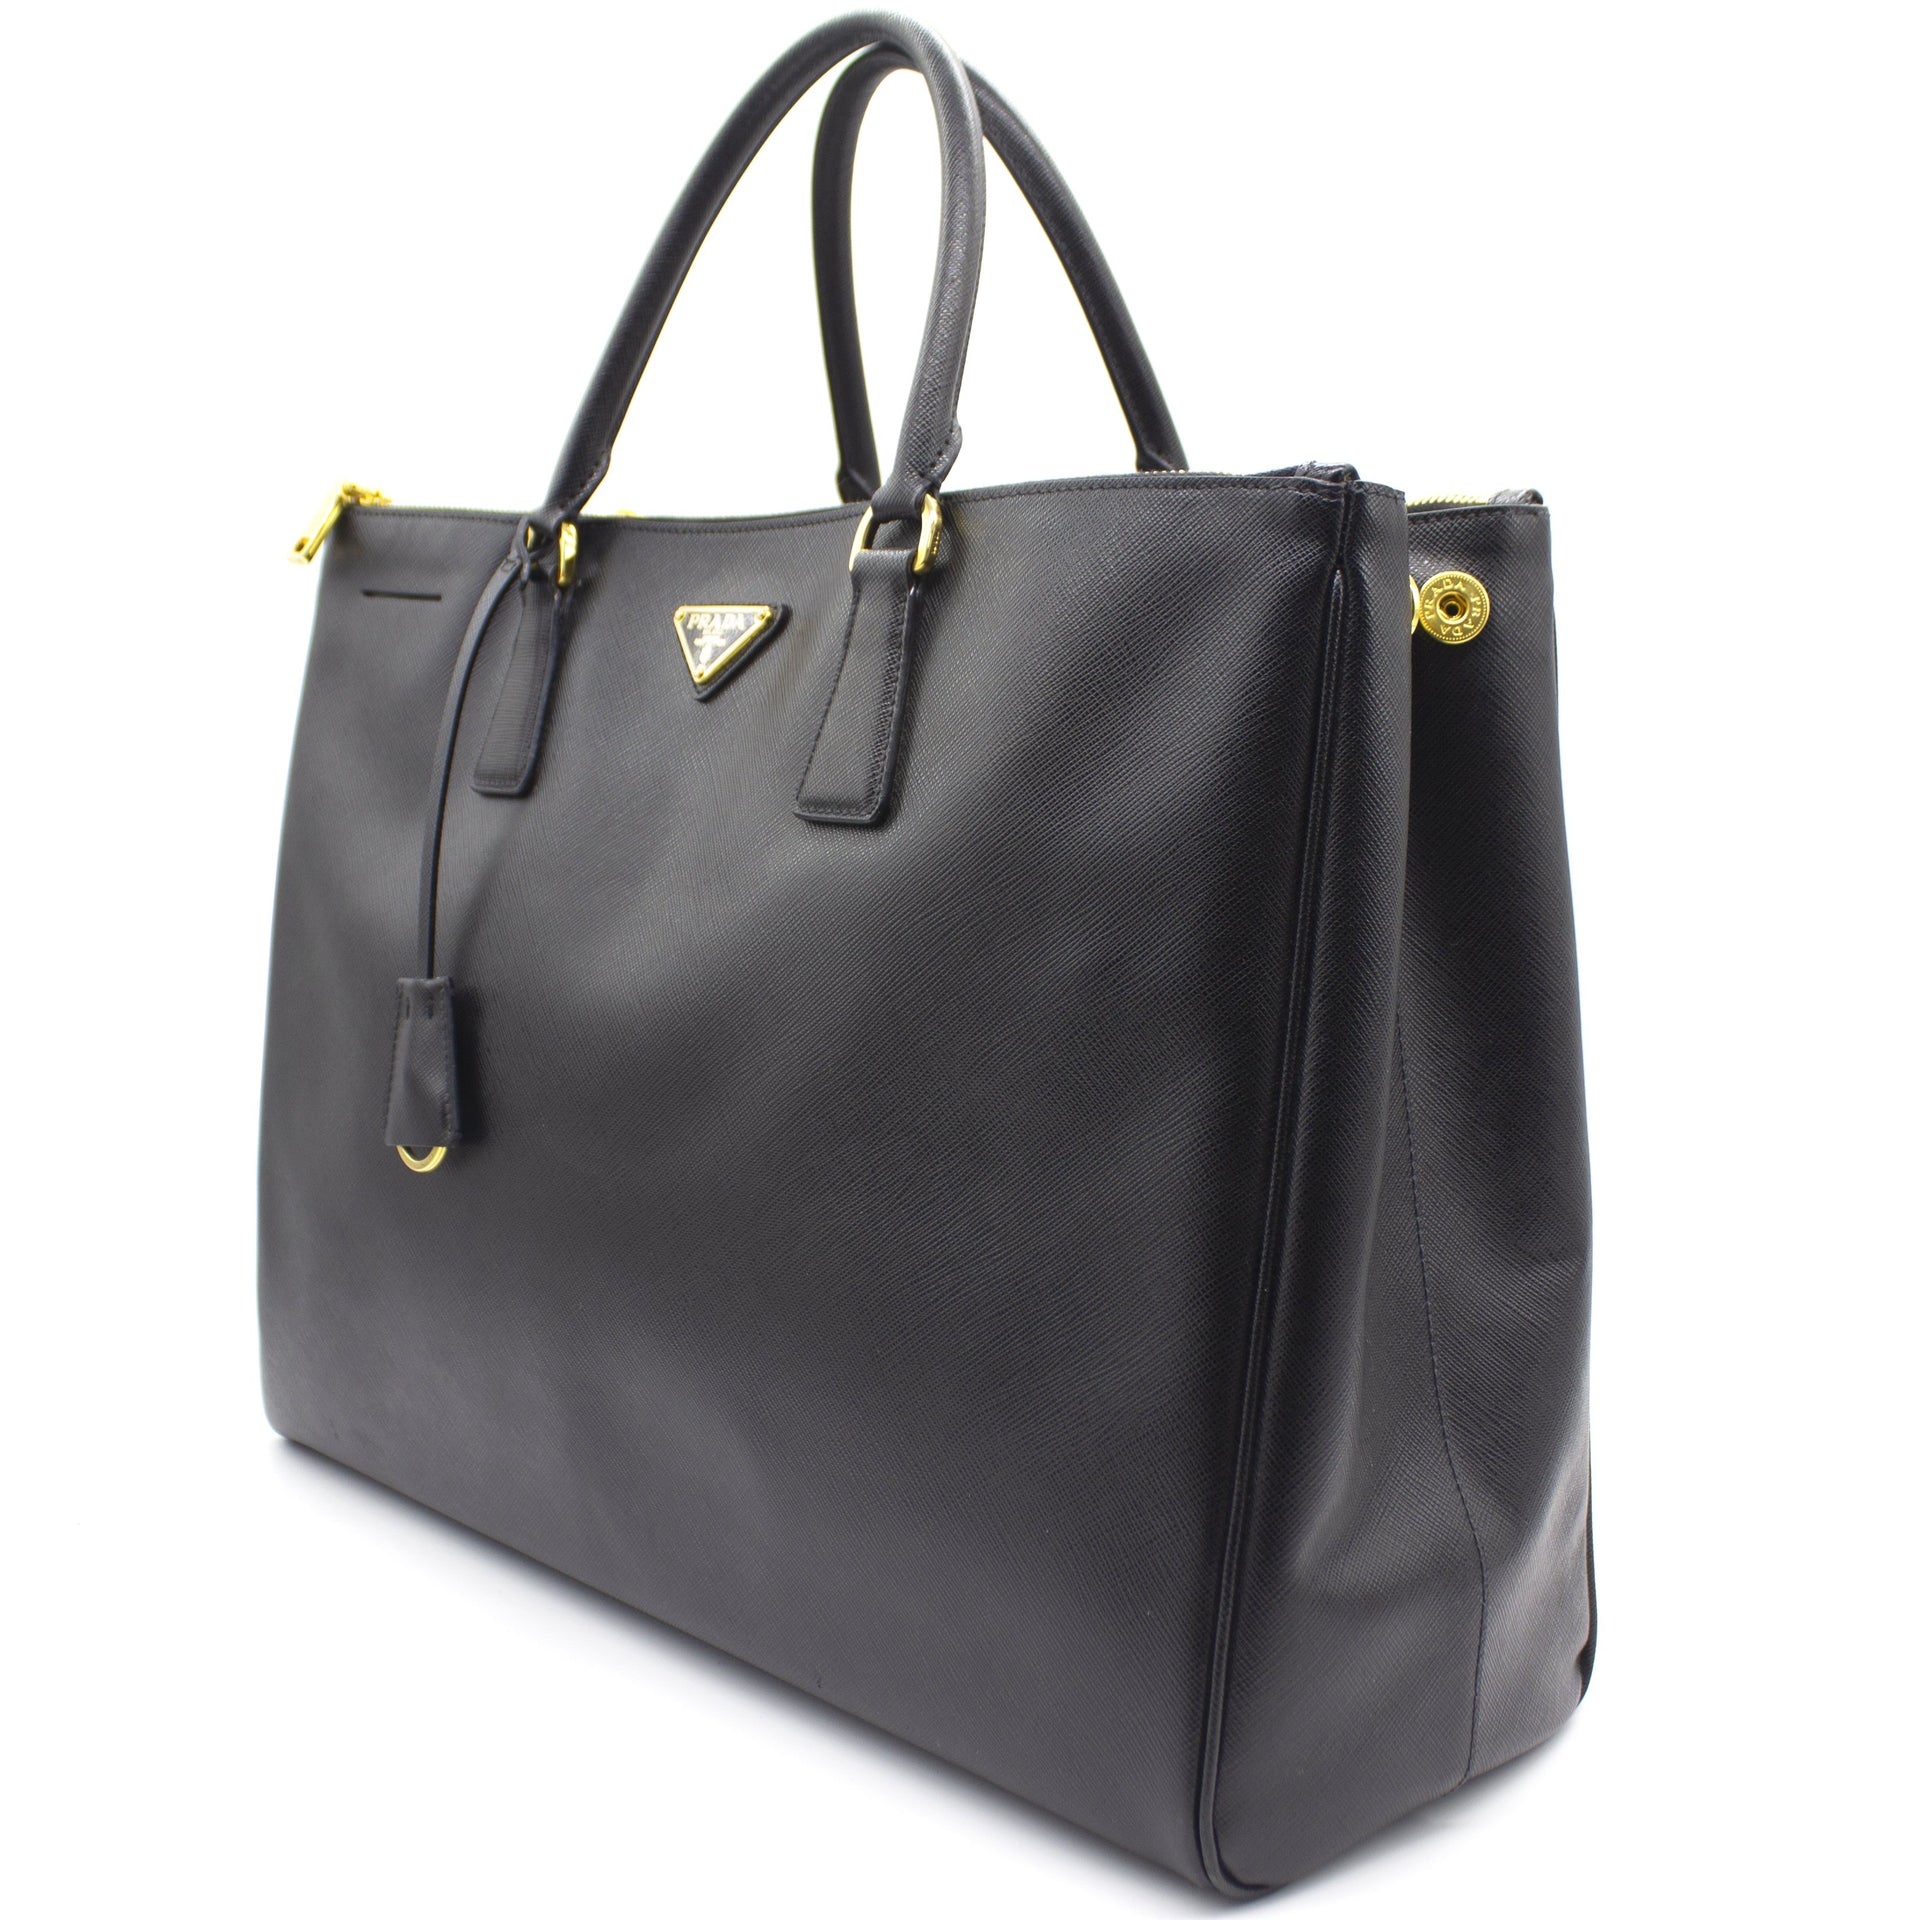 double zip tote large